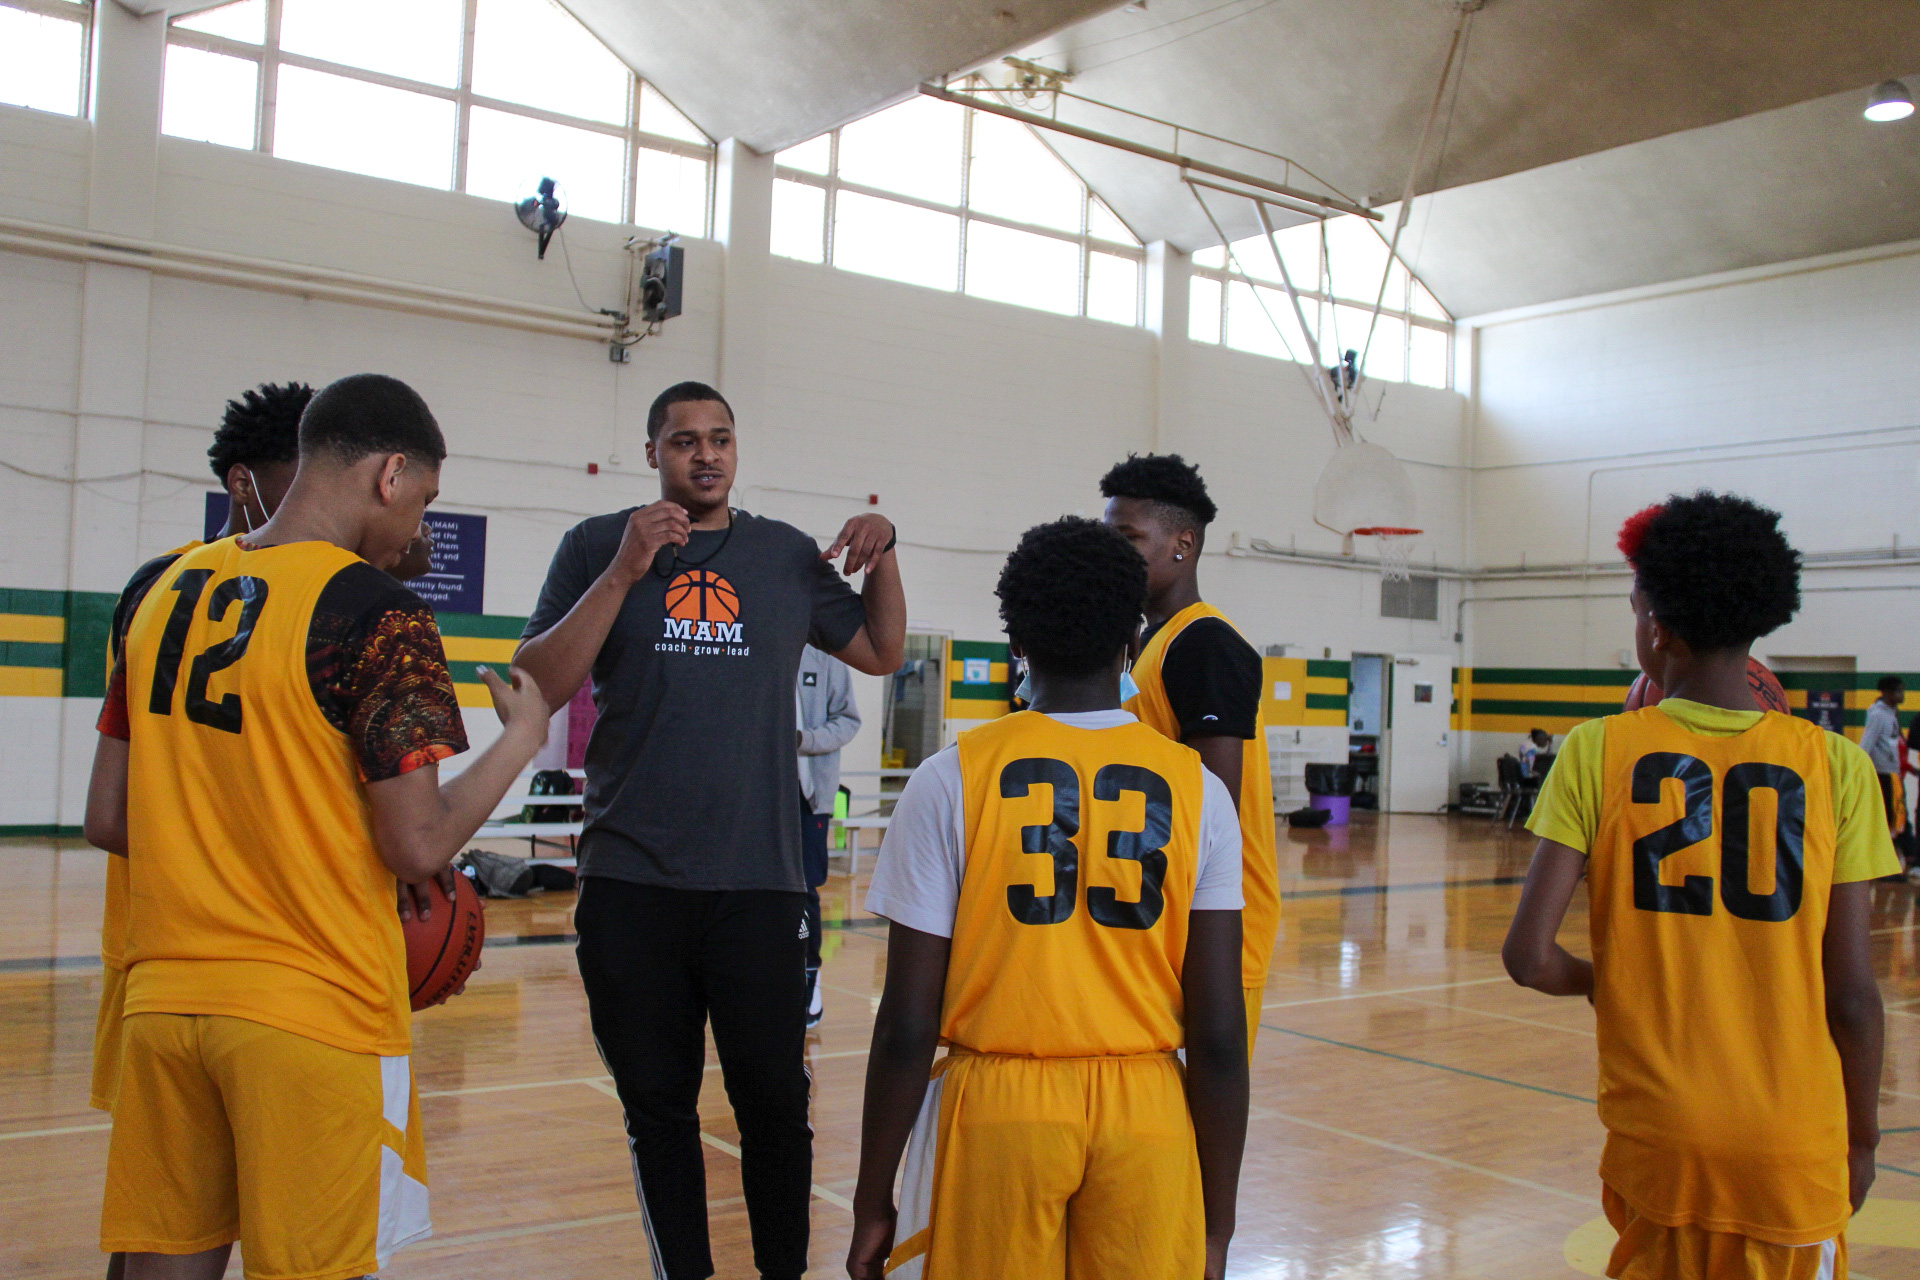 A group of basketball players from Memphis Athletic Ministries standing in a gym.